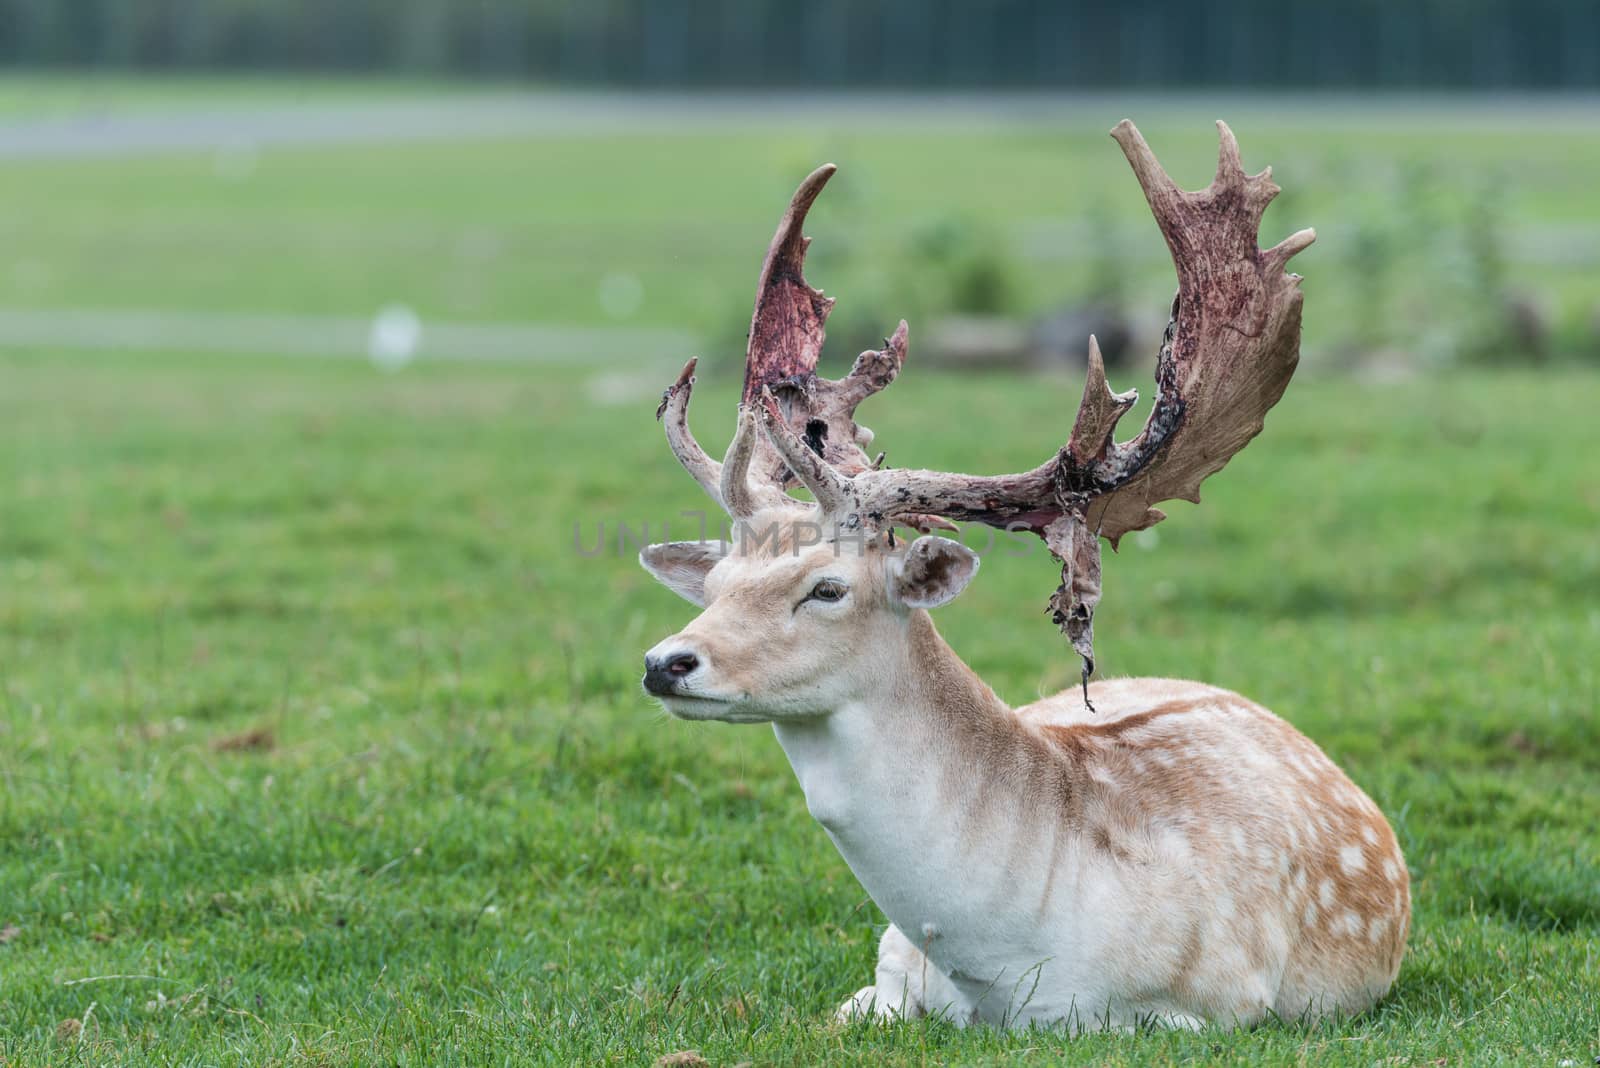 Male deer resting with a pack of deers on a grass field